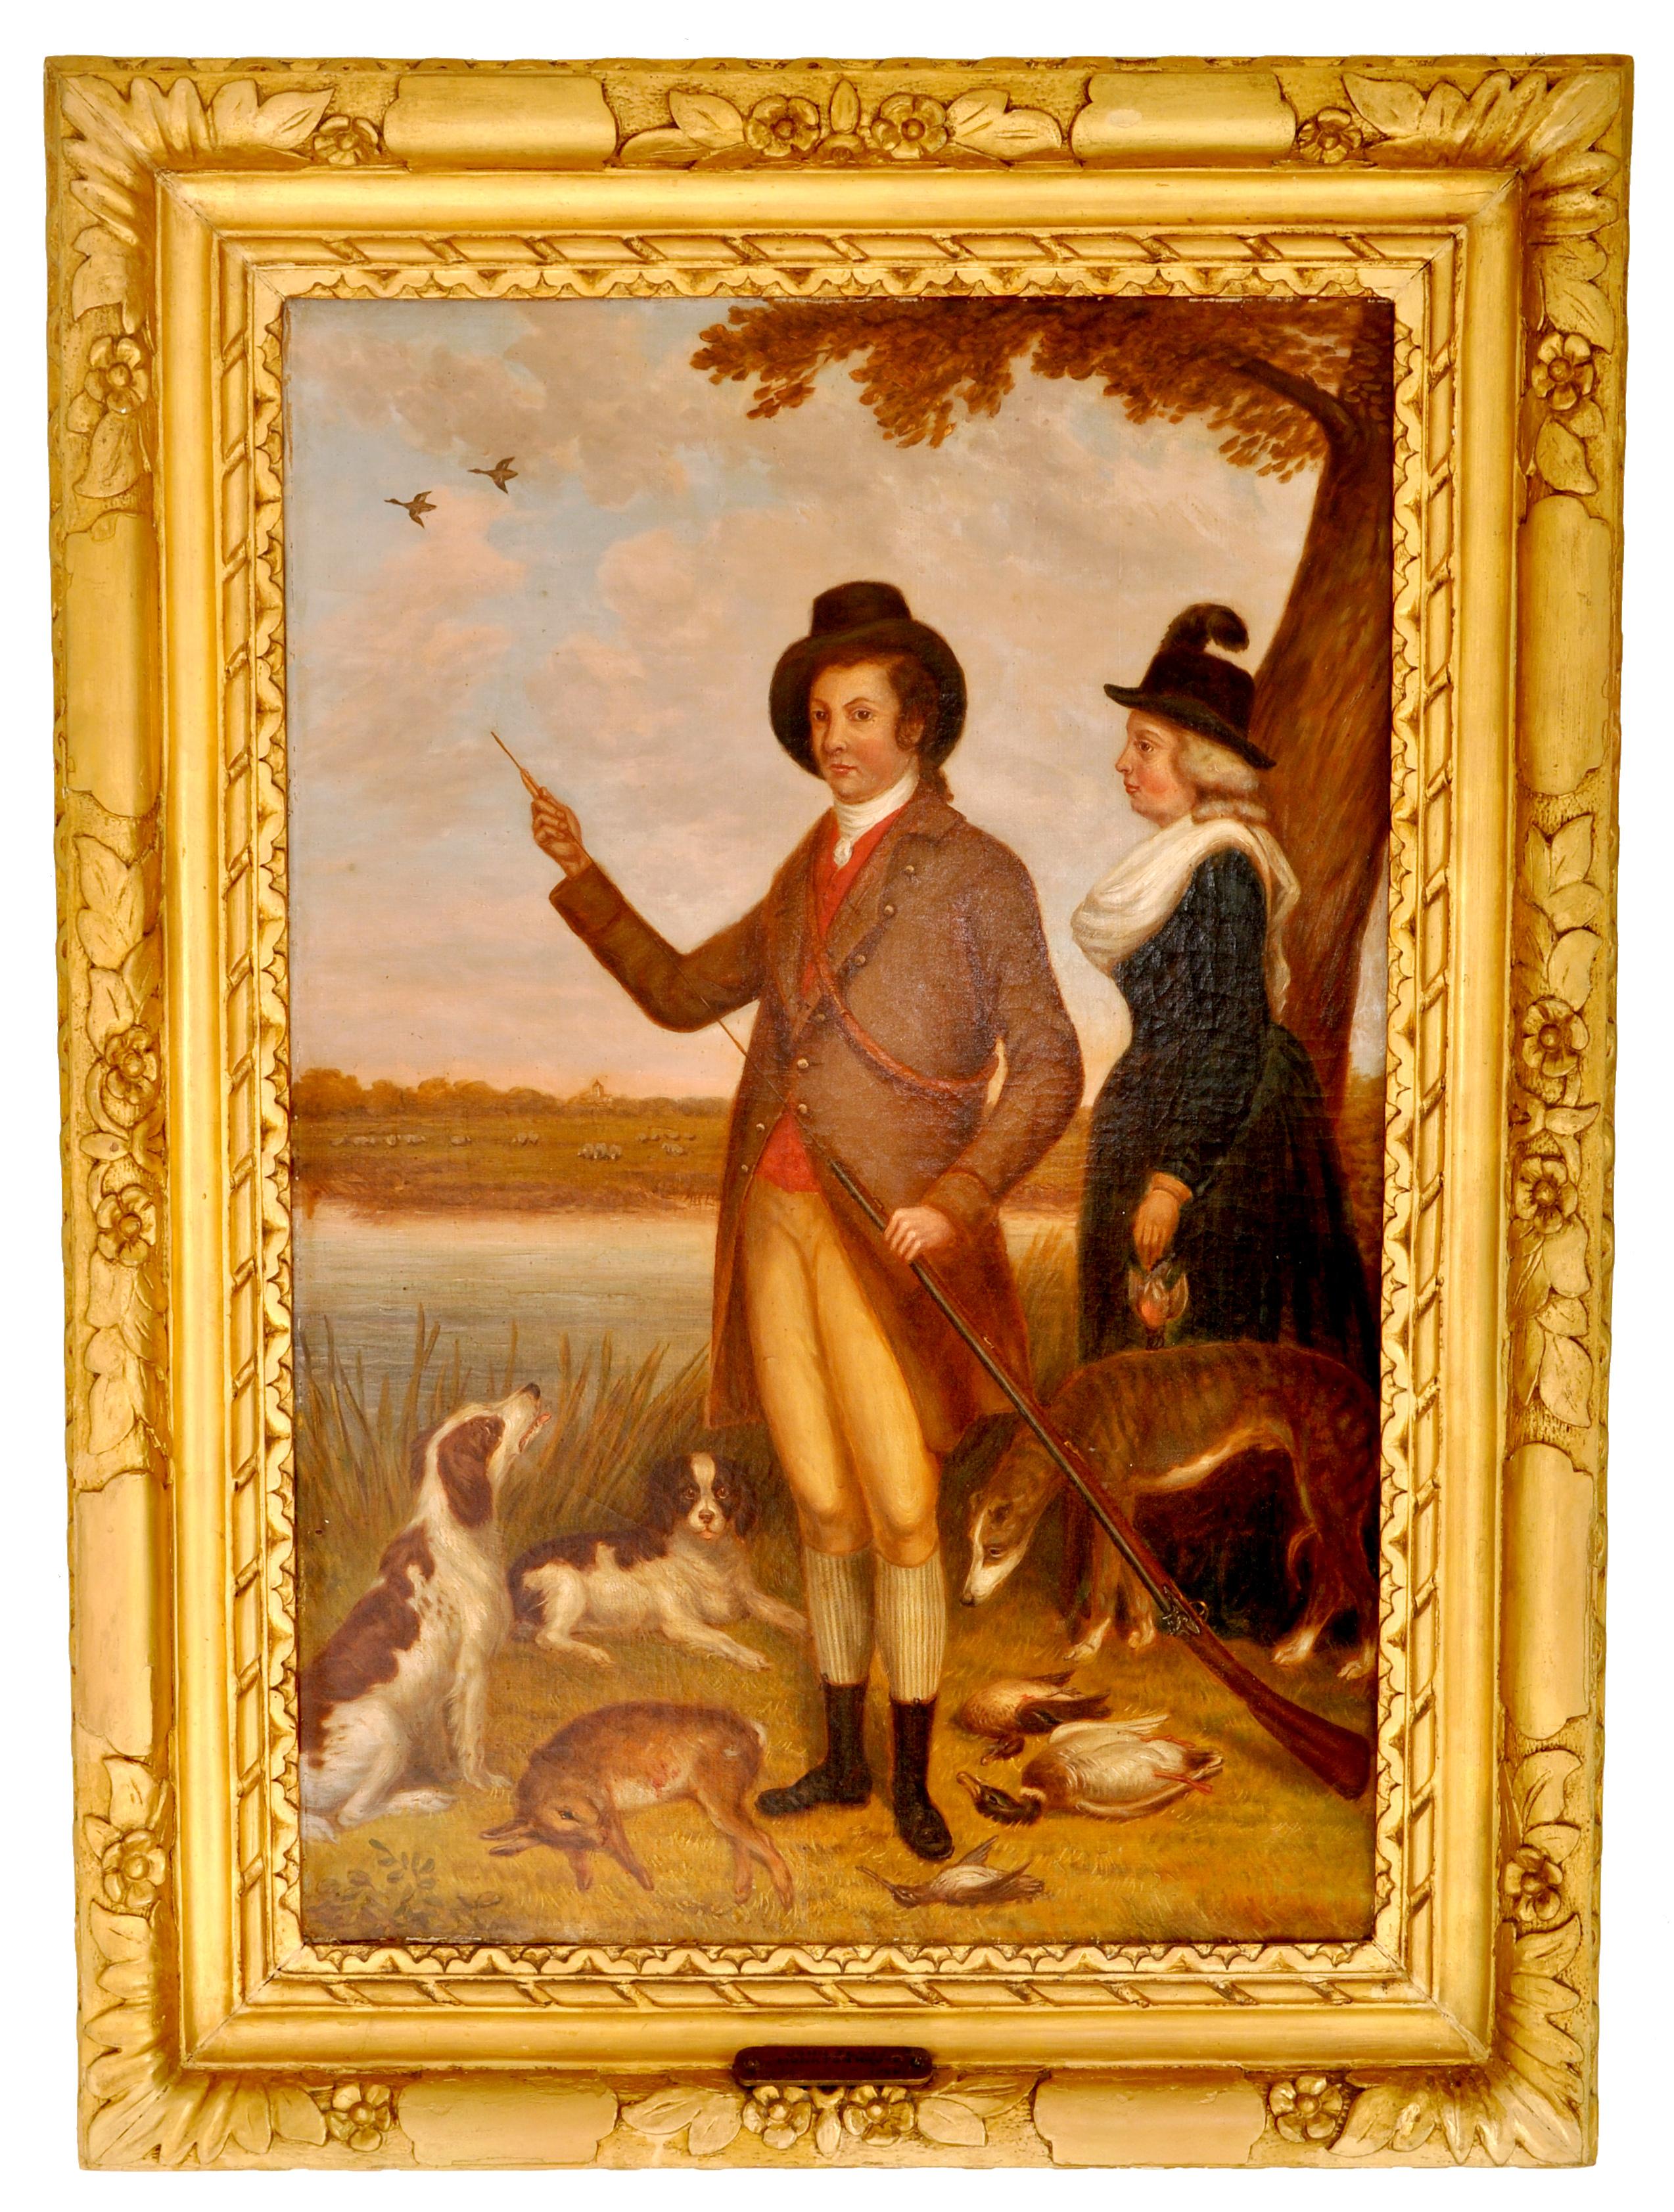 Unknown Portrait Painting - Antique Country House Georgian Hunting Portrait Oil on Canvas Painting 1750